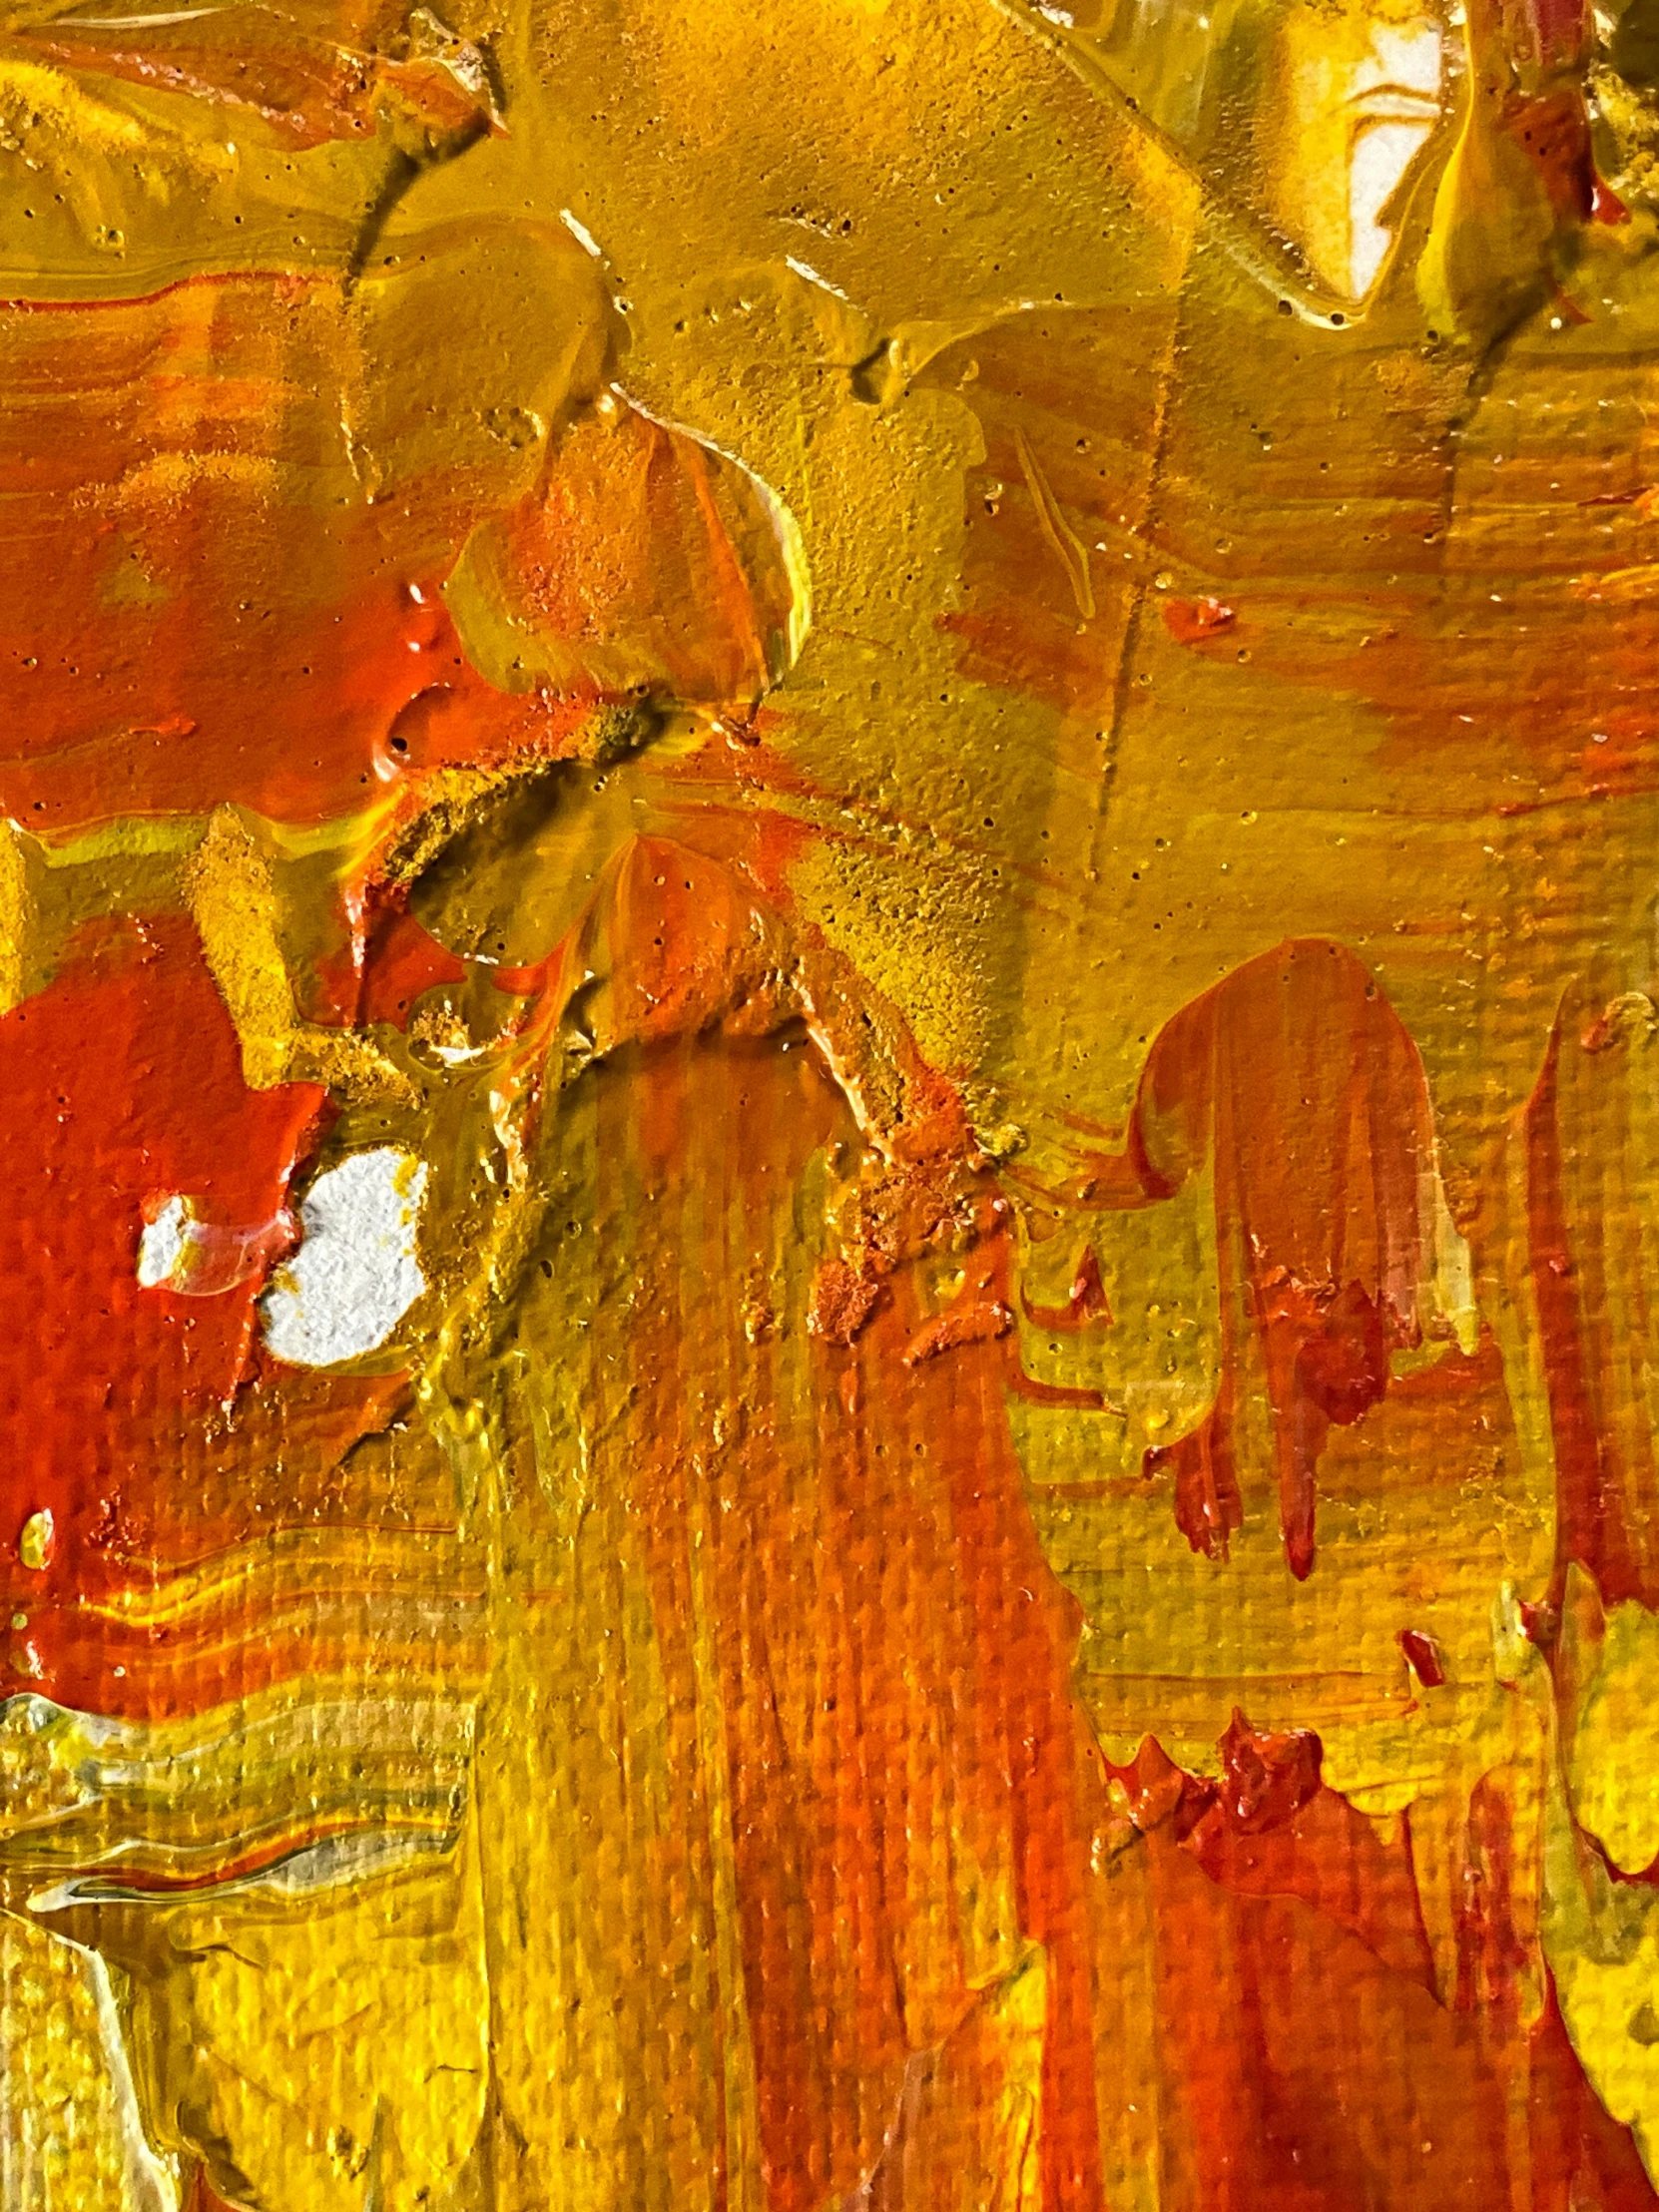 there is a painting with some yellow and red colors